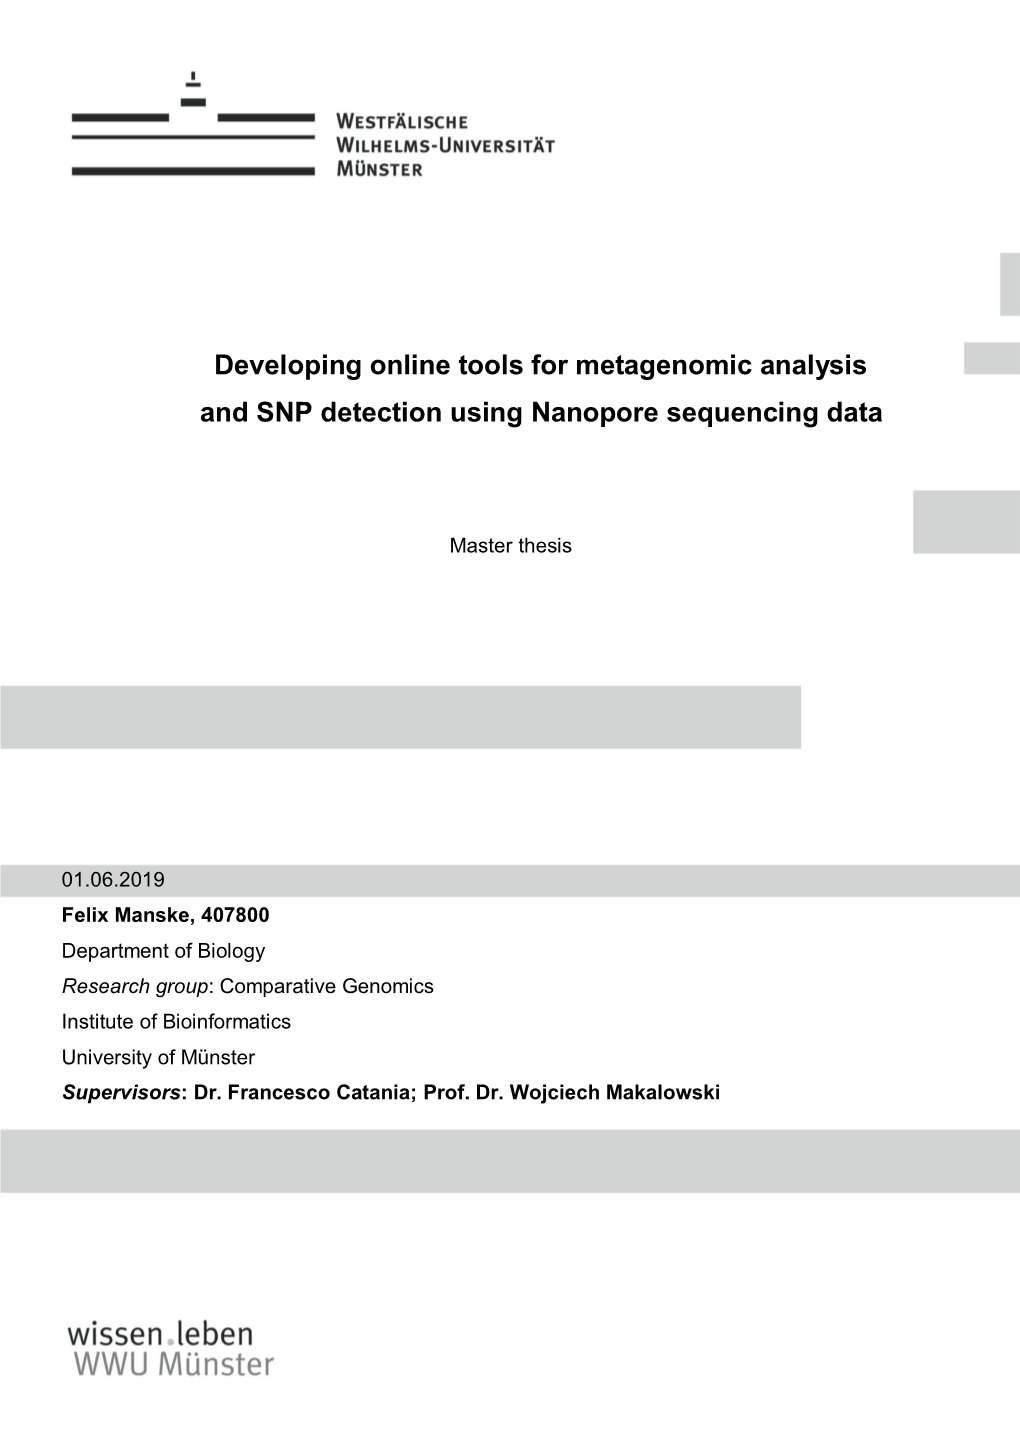 Developing Online Tools for Metagenomic Analysis and SNP Detection Using Nanopore Sequencing Data